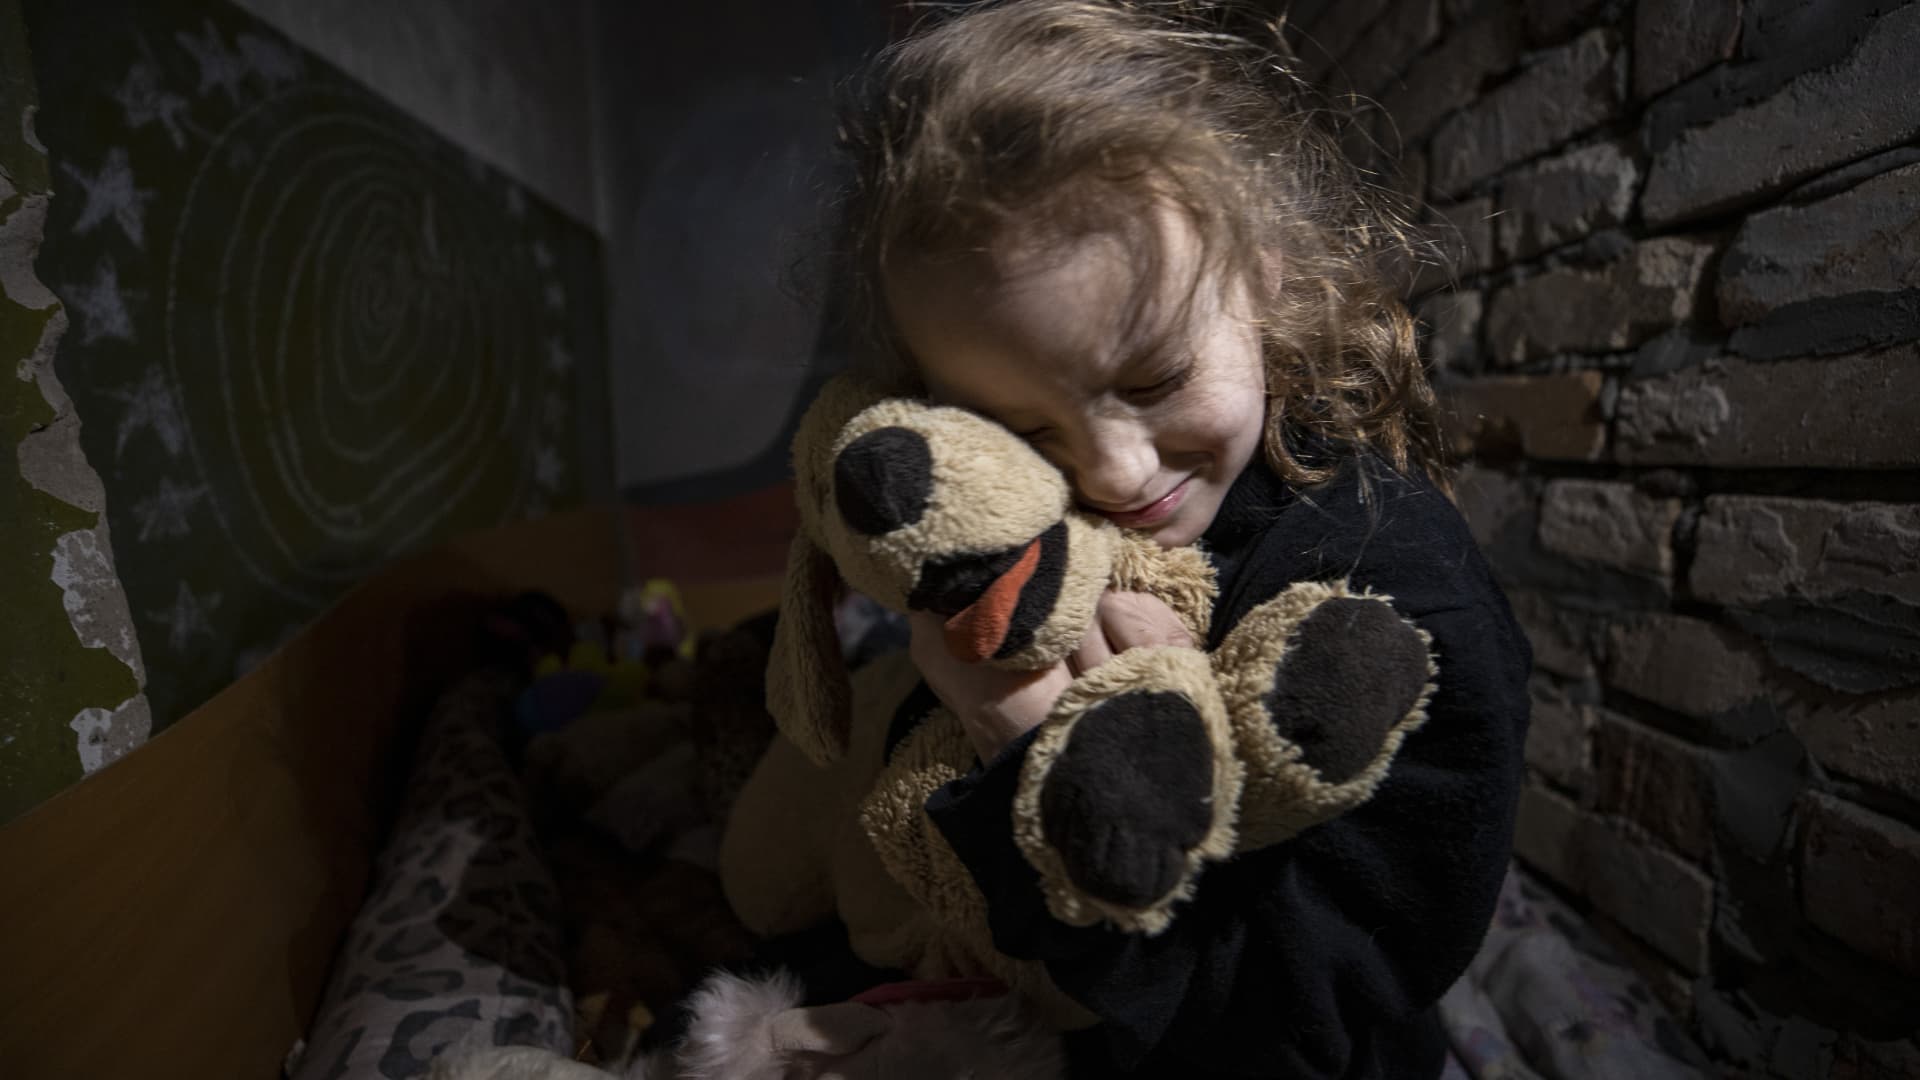 Anya, 7, plays with her toys and paints pictures to spend time in the shelter where she lives with her family amid the war in Donetsk Oblast, Ukraine on January 25, 2023. 